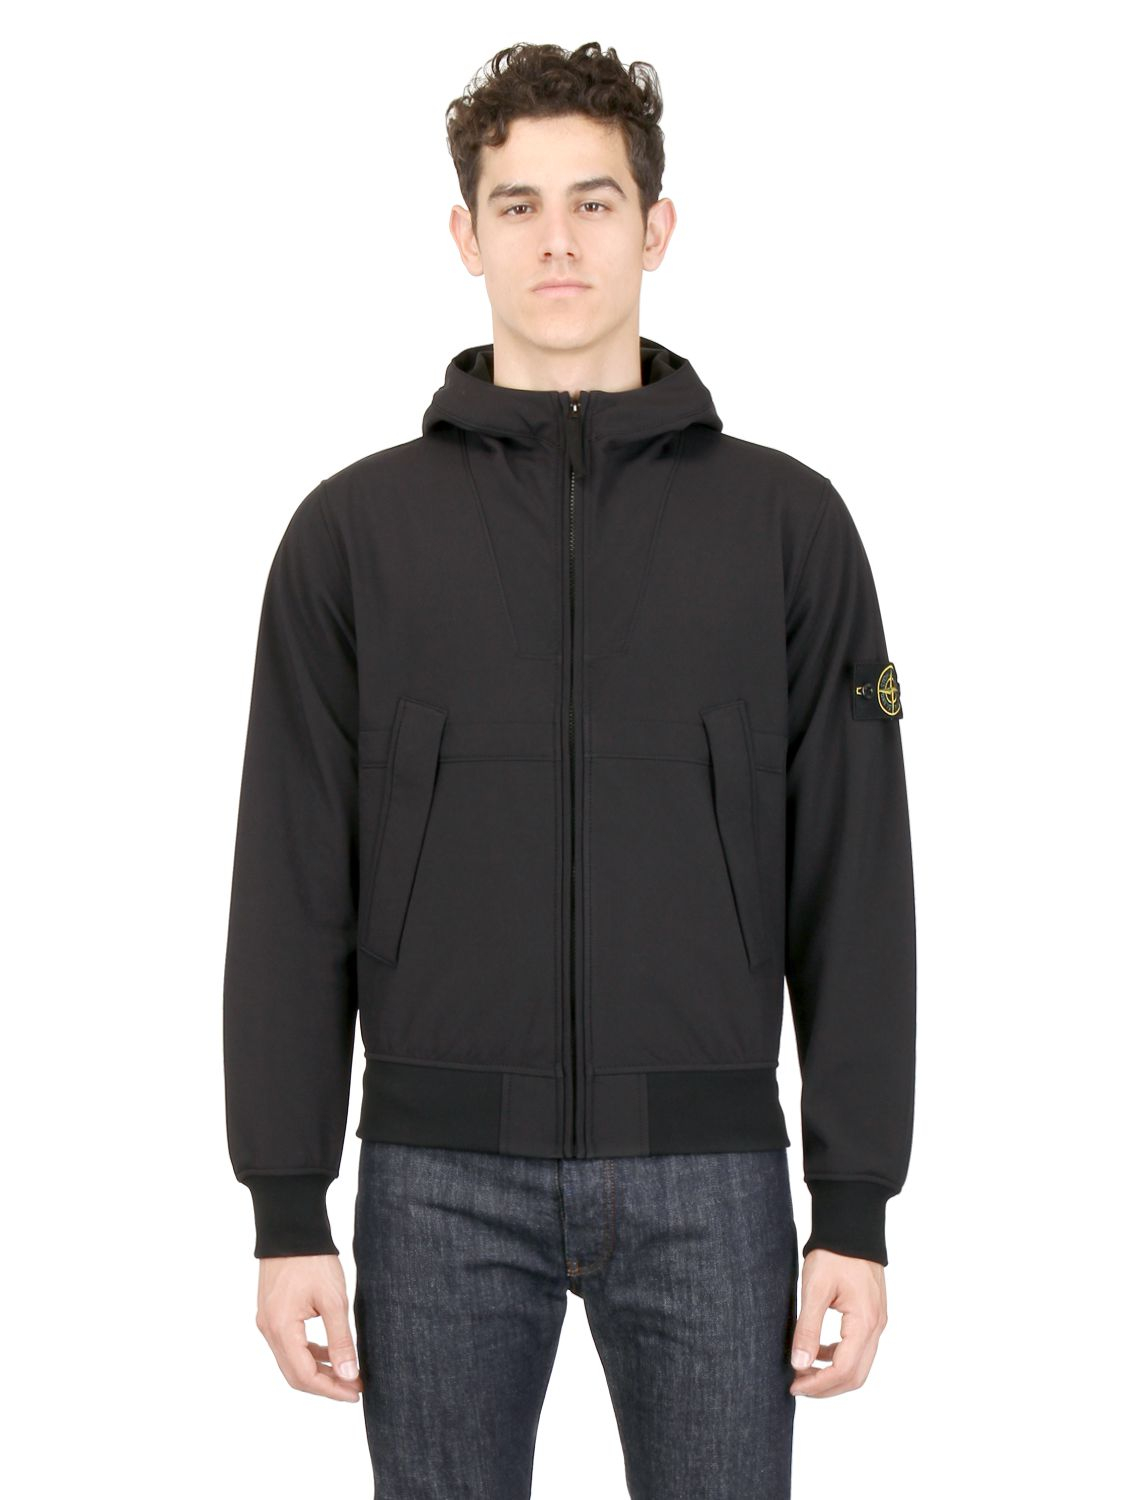 Lyst - Stone Island Hooded Polyester Jacket in Soft Shellr in Black for Men